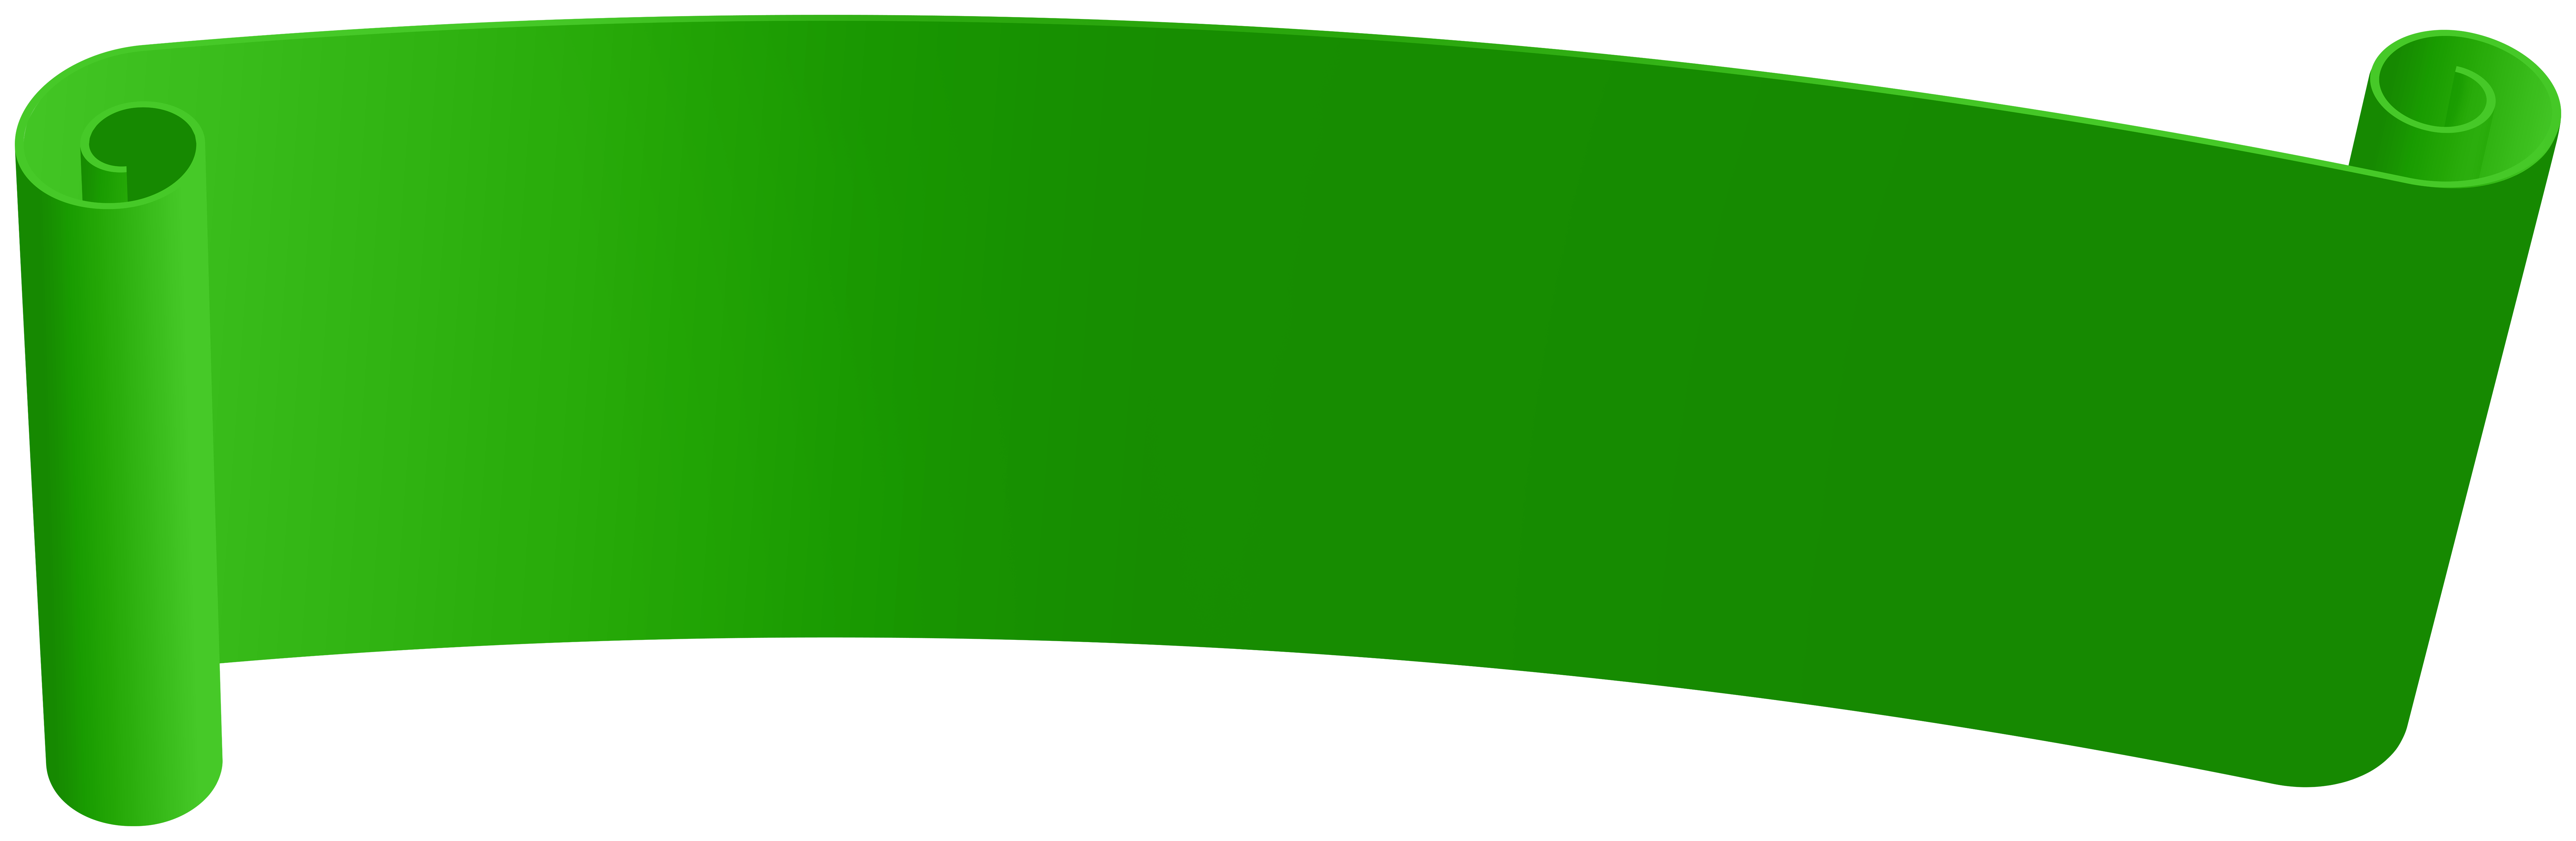 Green Banner PNG Transparent Clipart​ | Gallery Yopriceville - High-Quality  Free Images and Transparent PNG Clipart